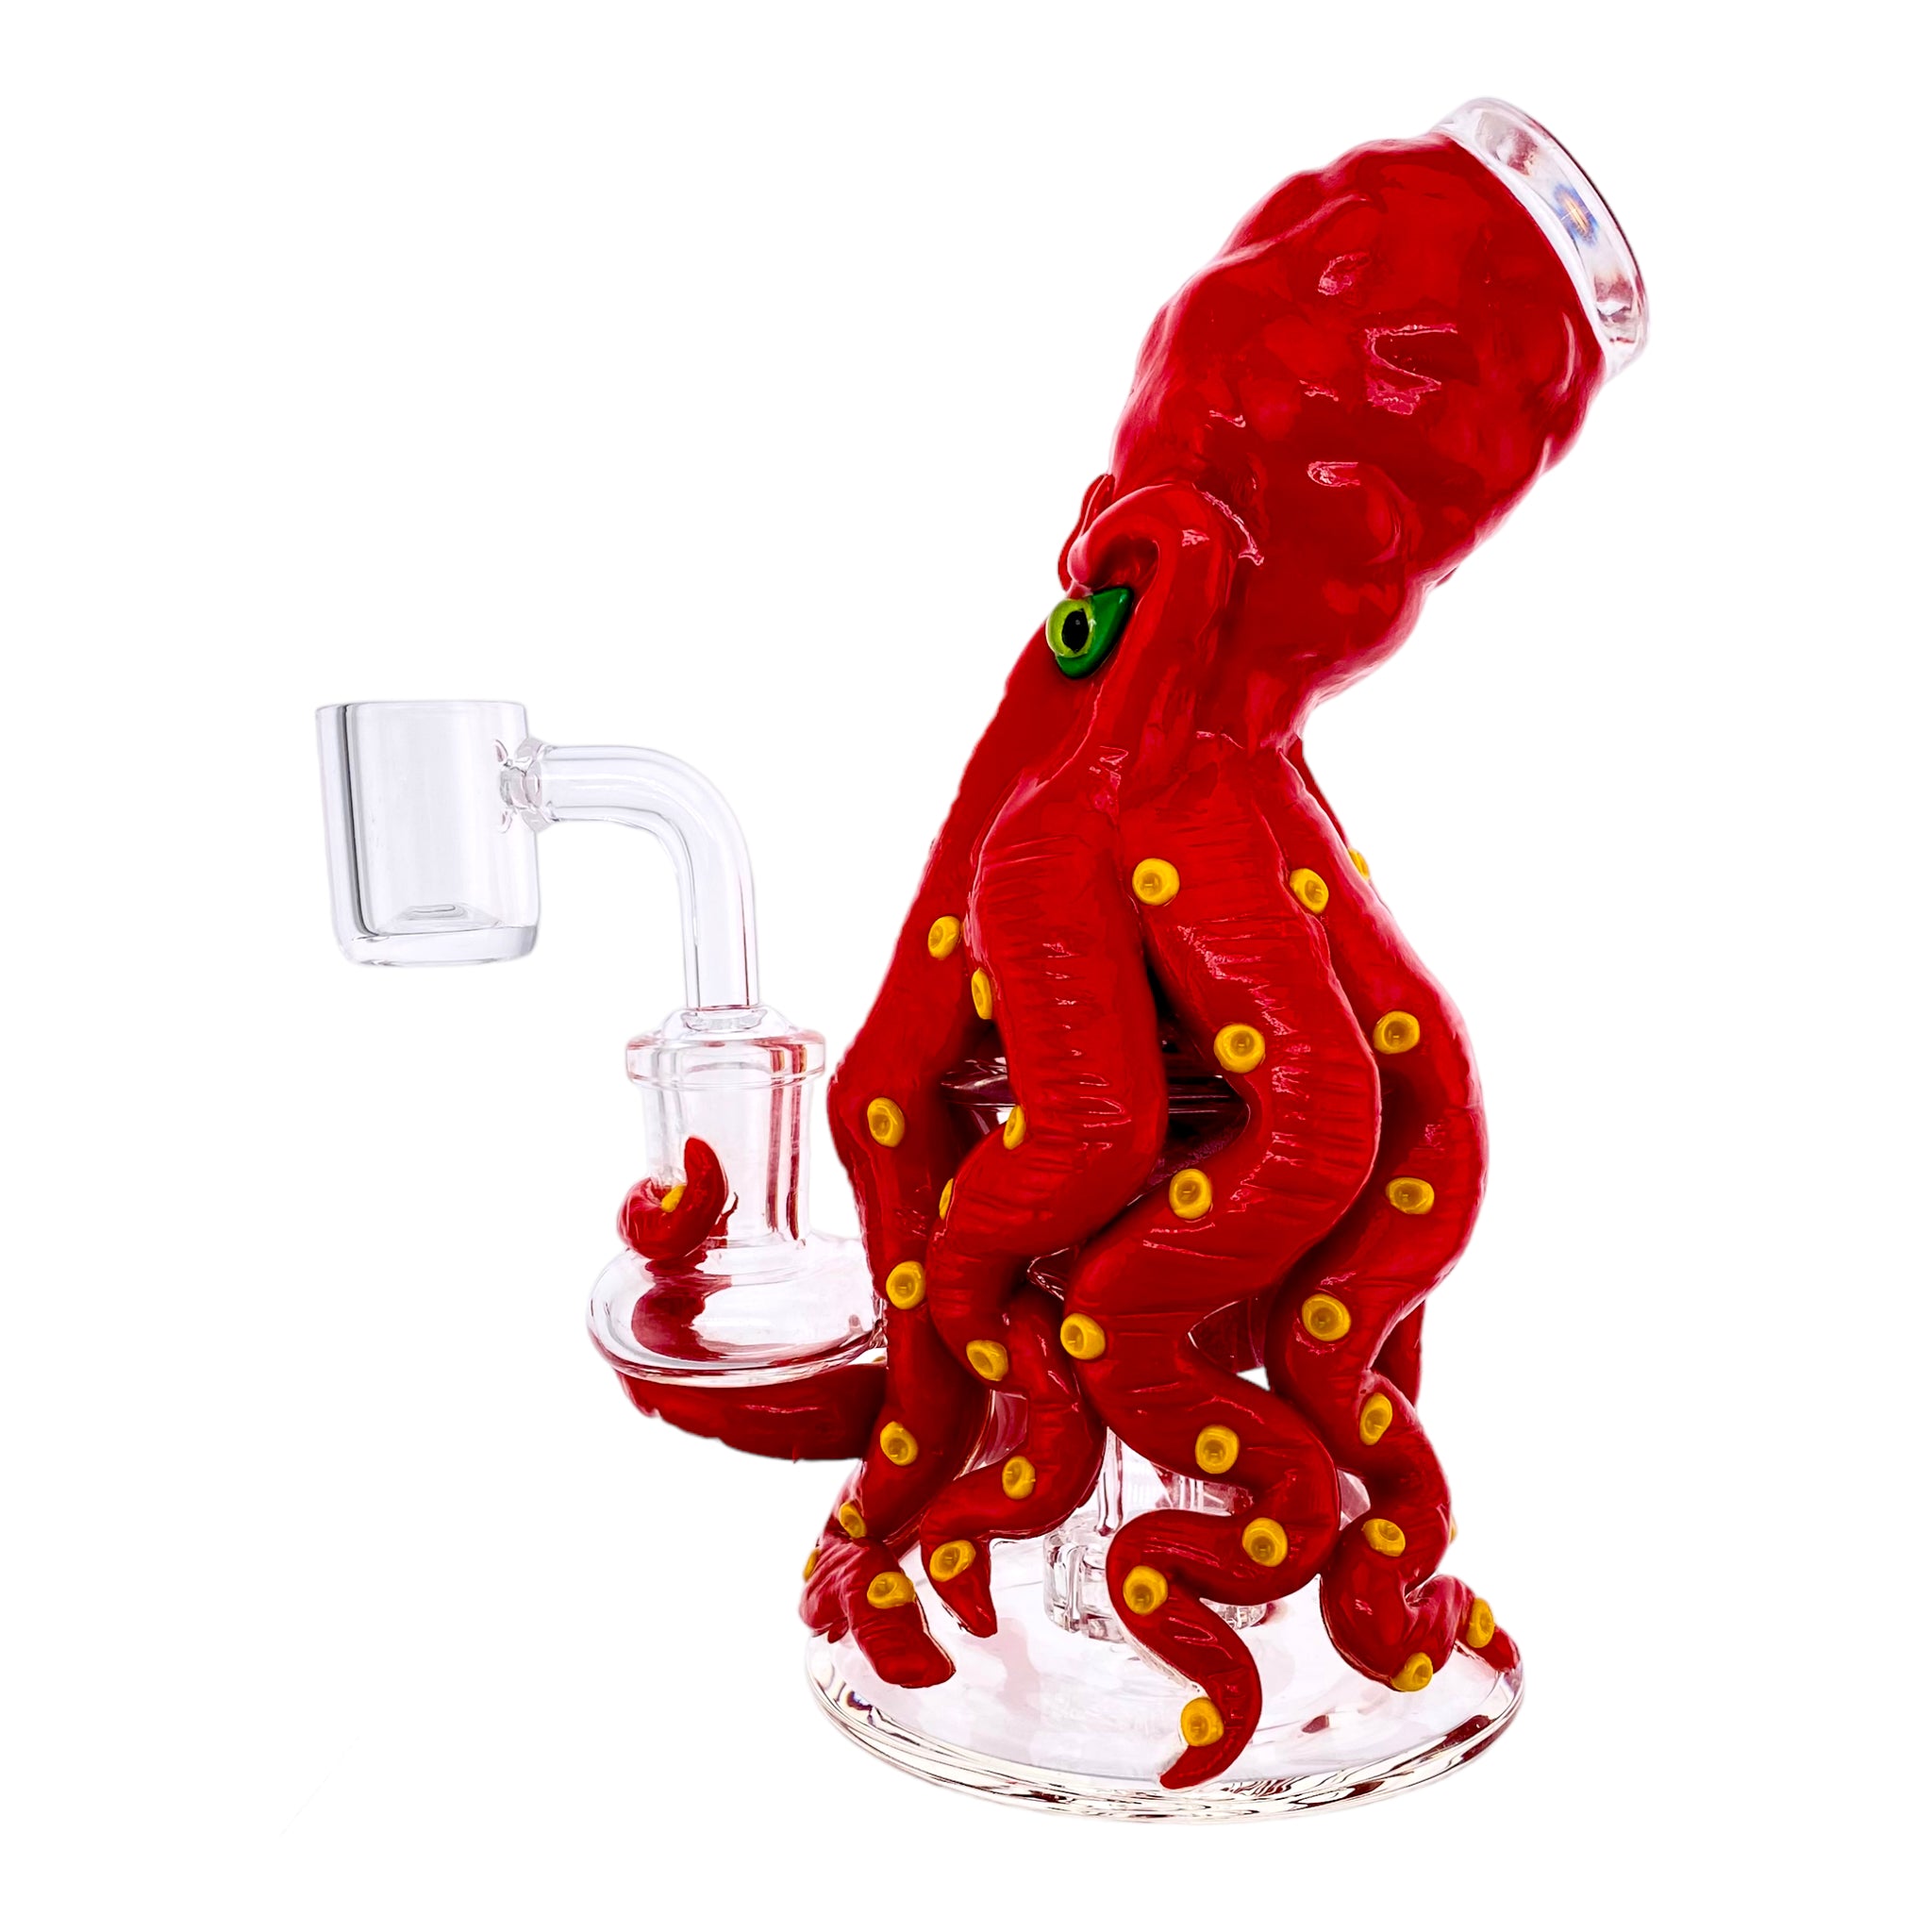 Red Octopus Monster Dab Rig